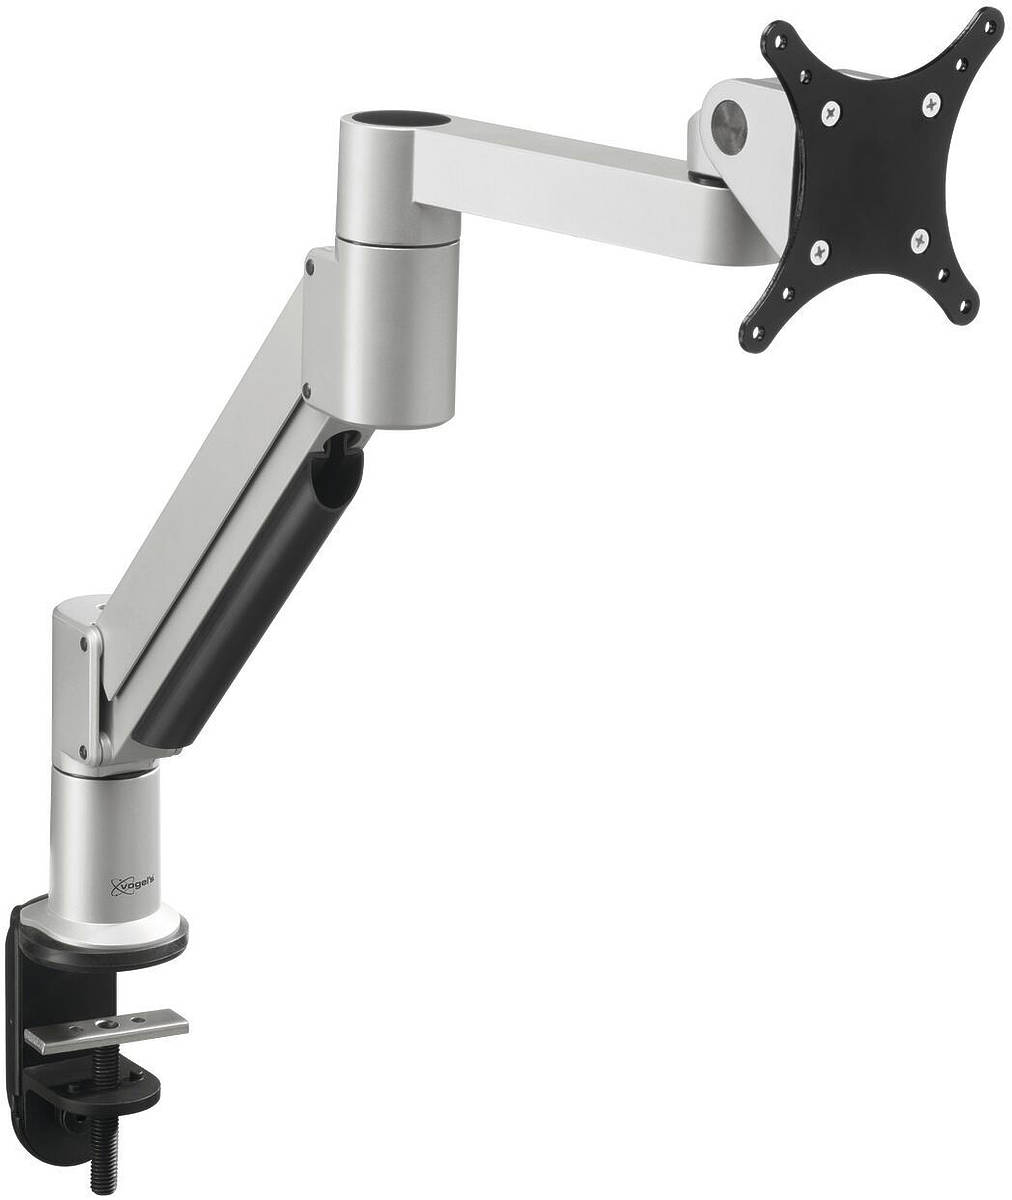 Vogels PFD8541 Angled Twin pivot 10-29" LCD/LED monitor desk mount product image. Click to enlarge.